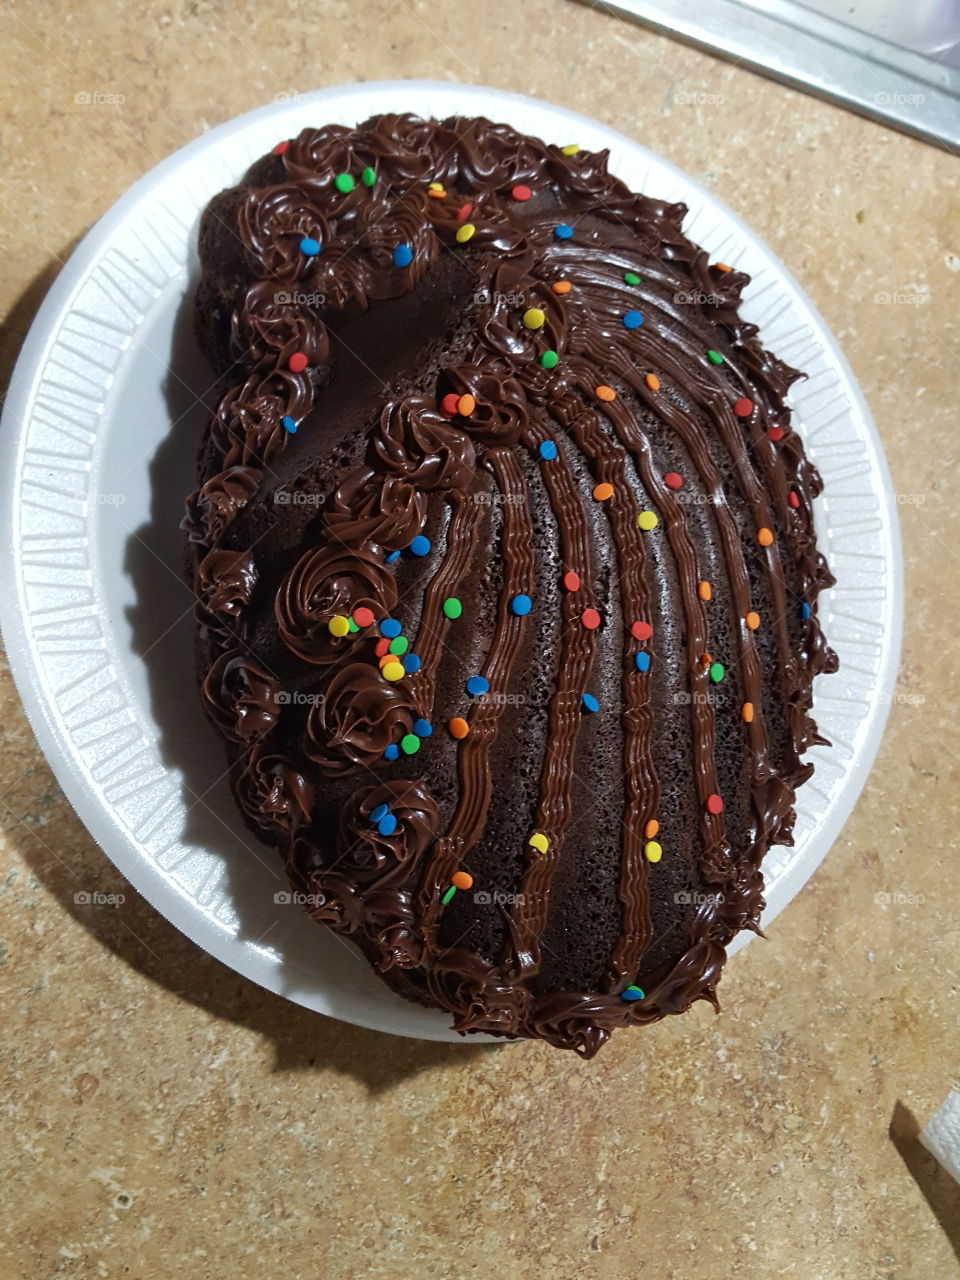 I love to bake but lately I been slacking so yesterday I decided to bake this shell  chocolate cake for my Niece and Nephew.  it is so delicious .